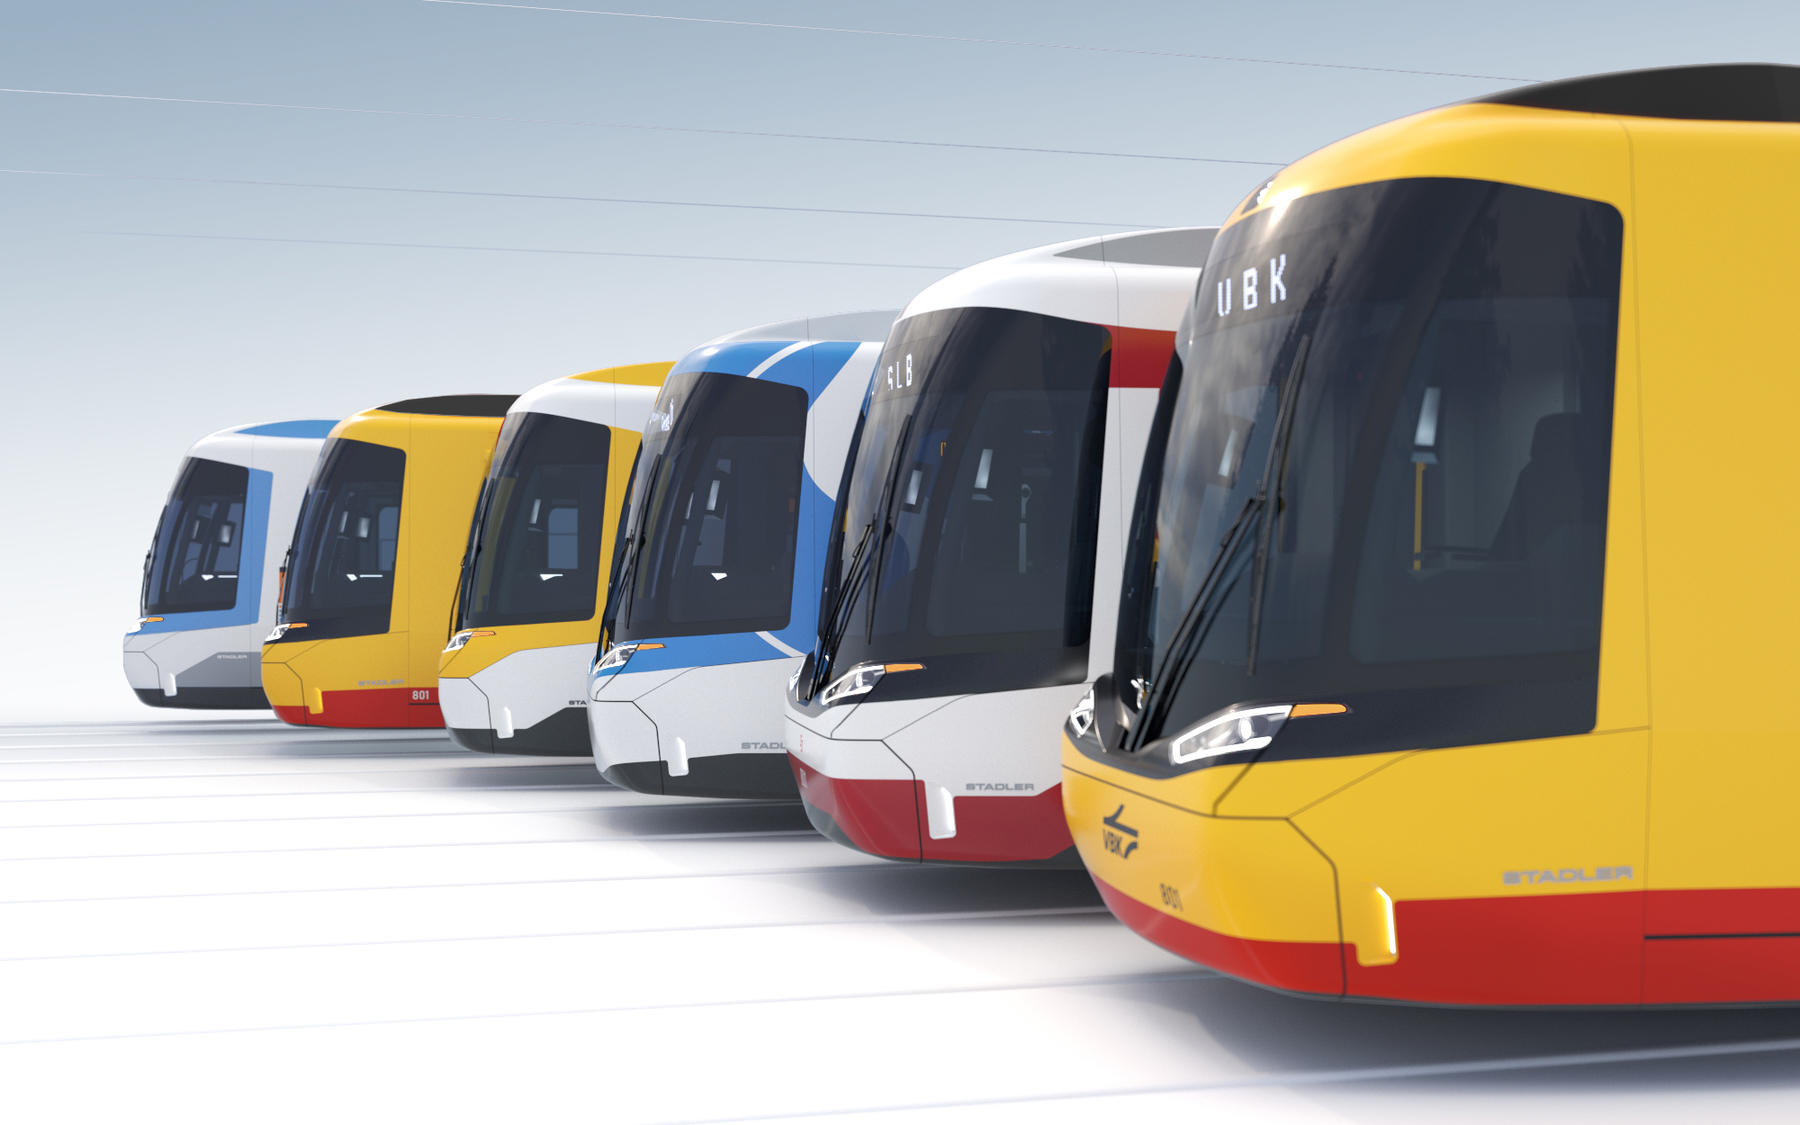 Stadler has won a contract to provide CITYLINK tram-trains for six operators in Germany and Austria